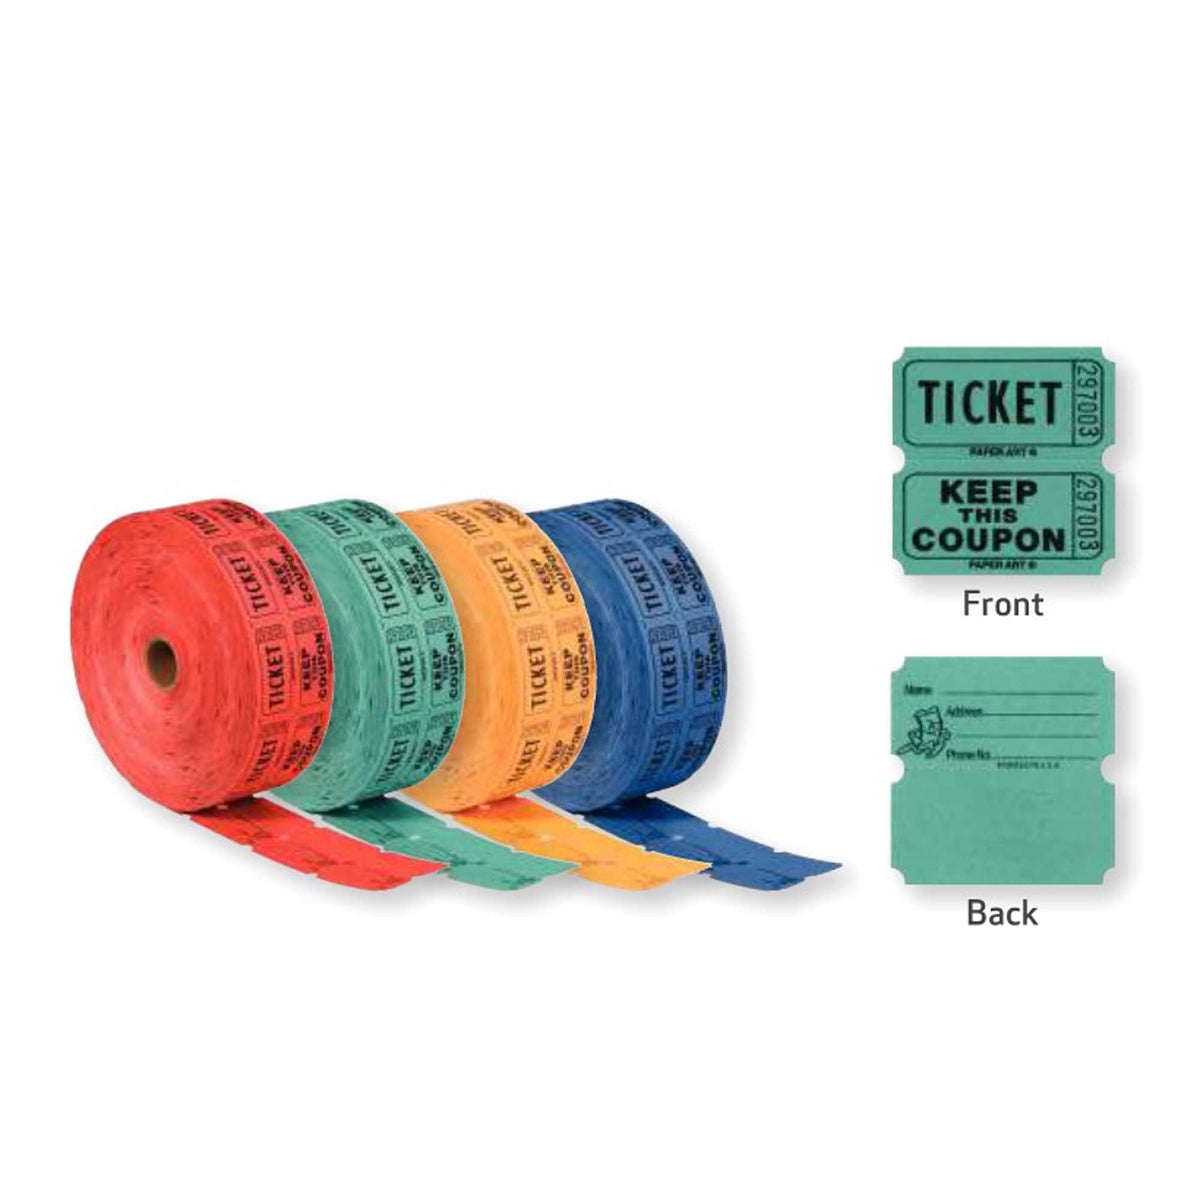 CREATIVE CONVERTING Party Supplies Double Ticket Roll, Assortment, 2000 Count 073525600901